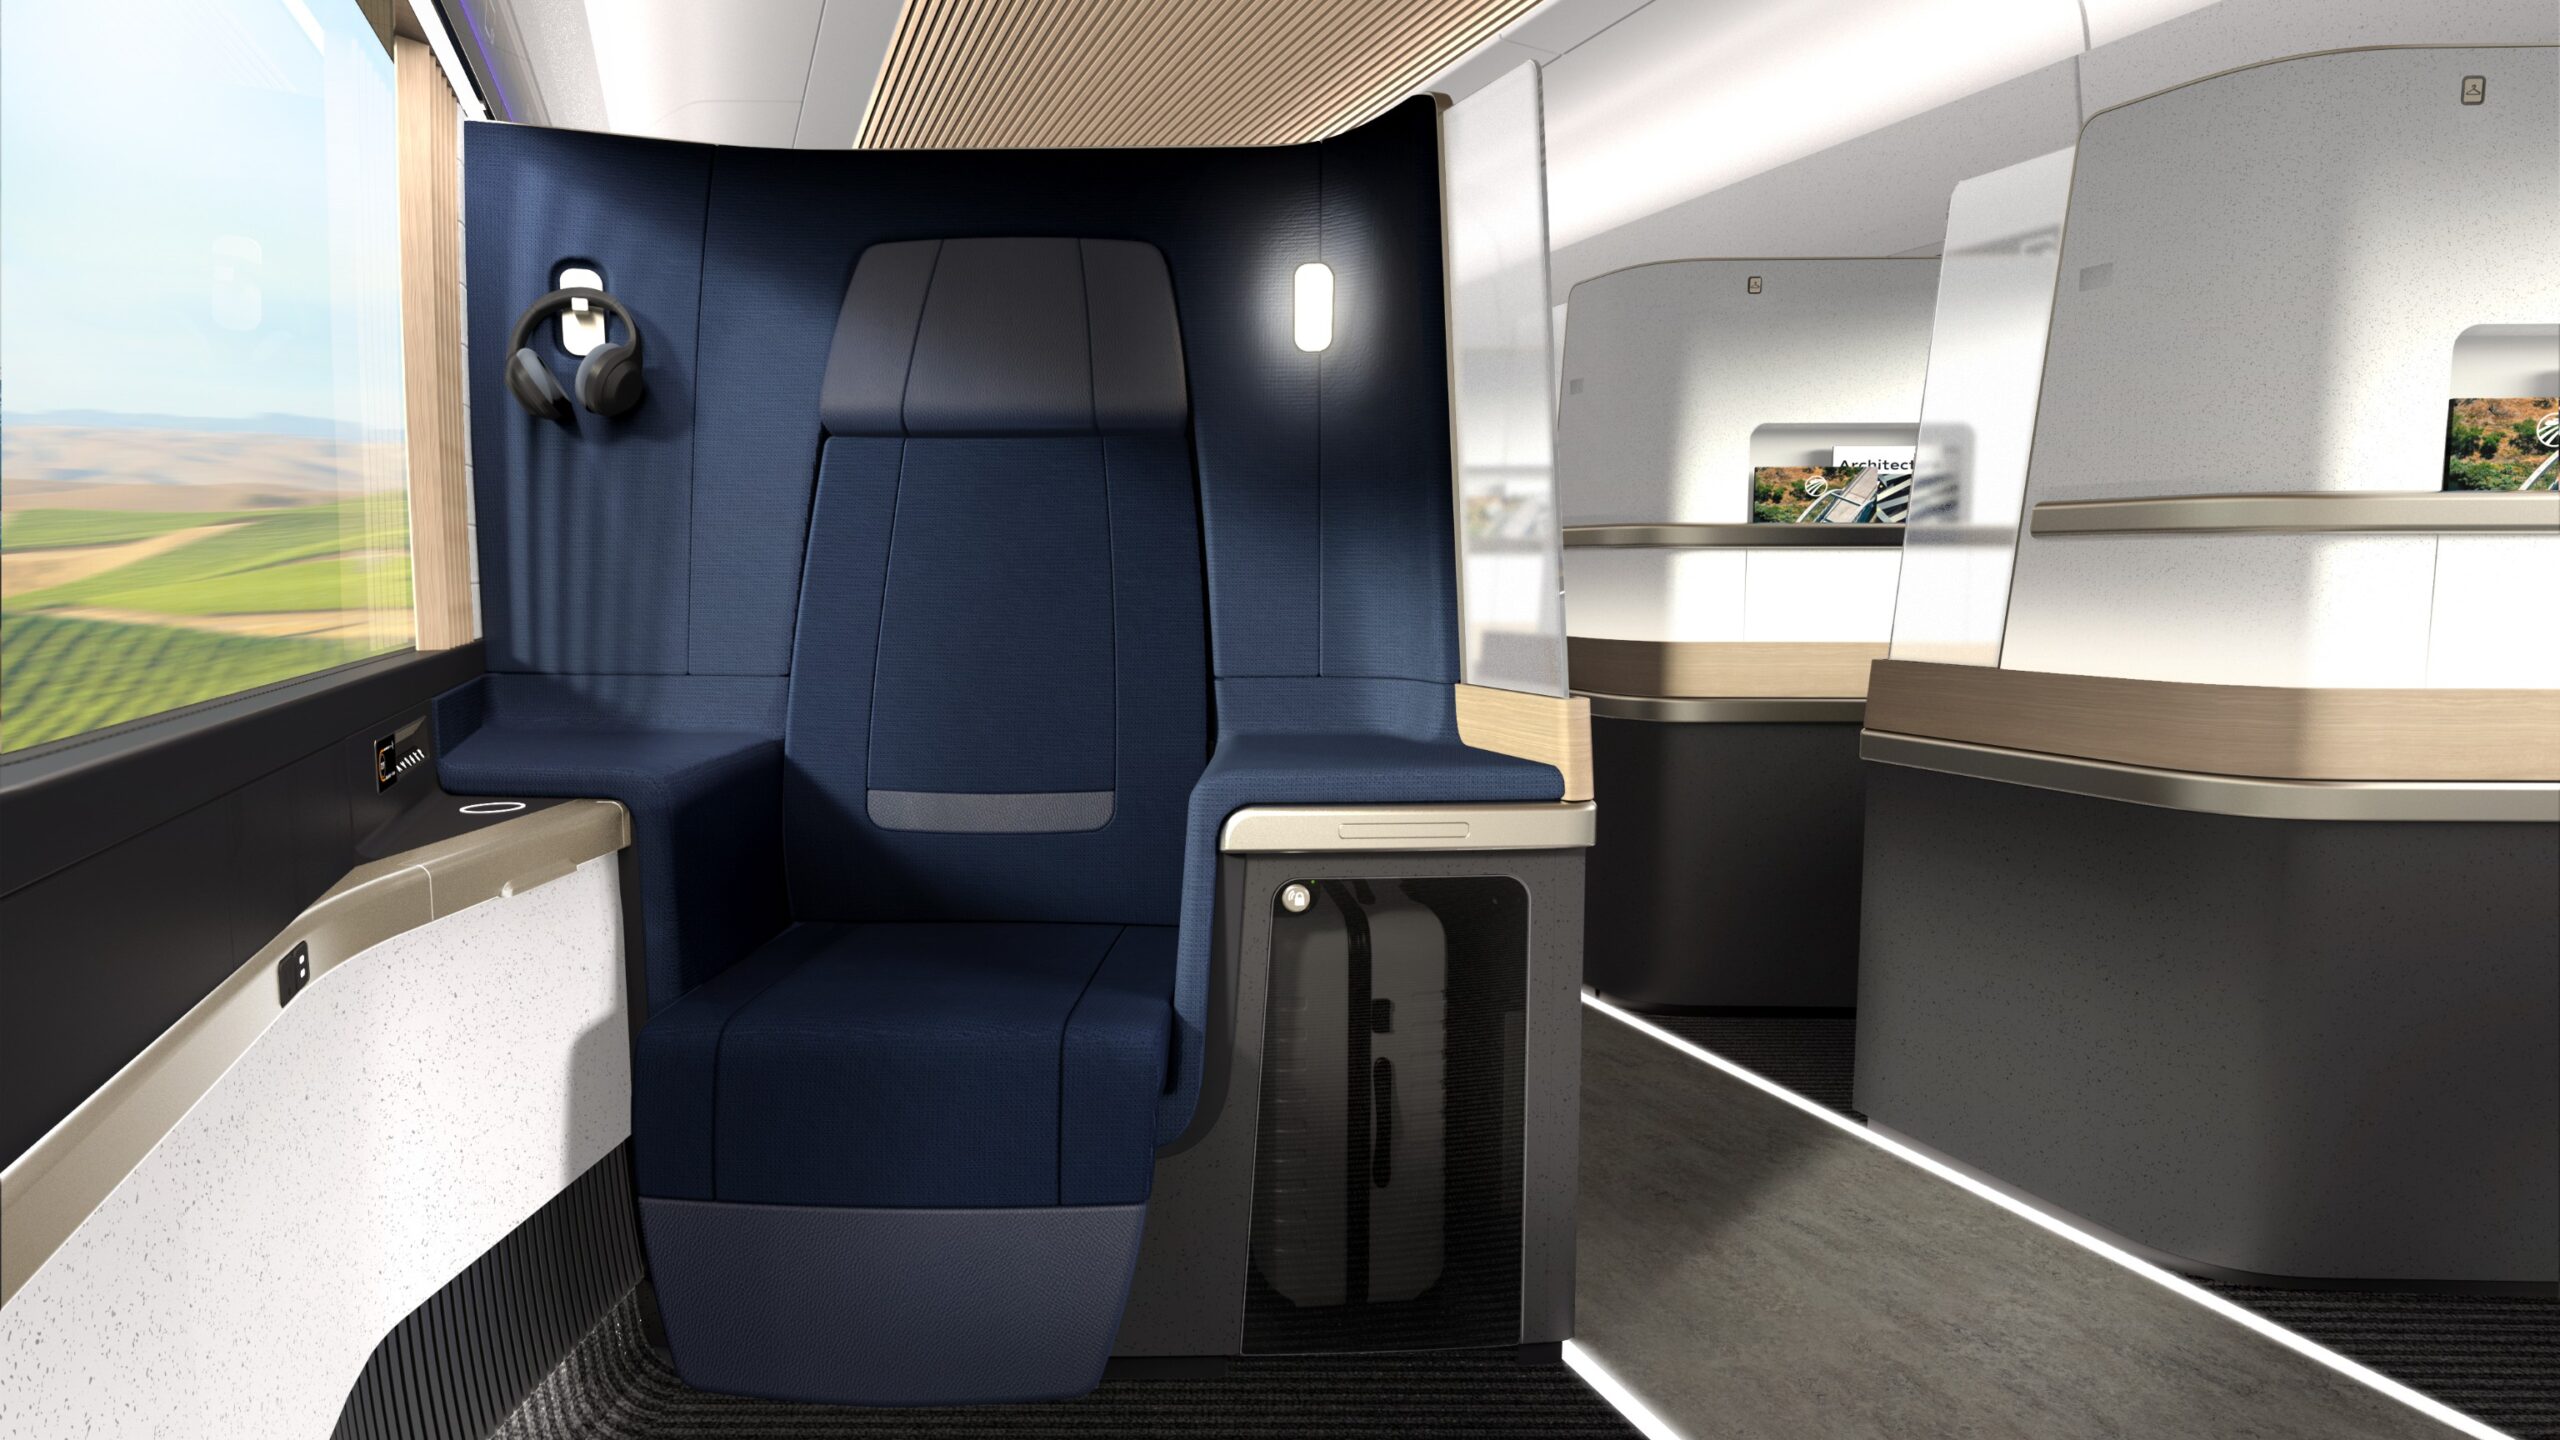 A preliminary rendering of Premium seating  